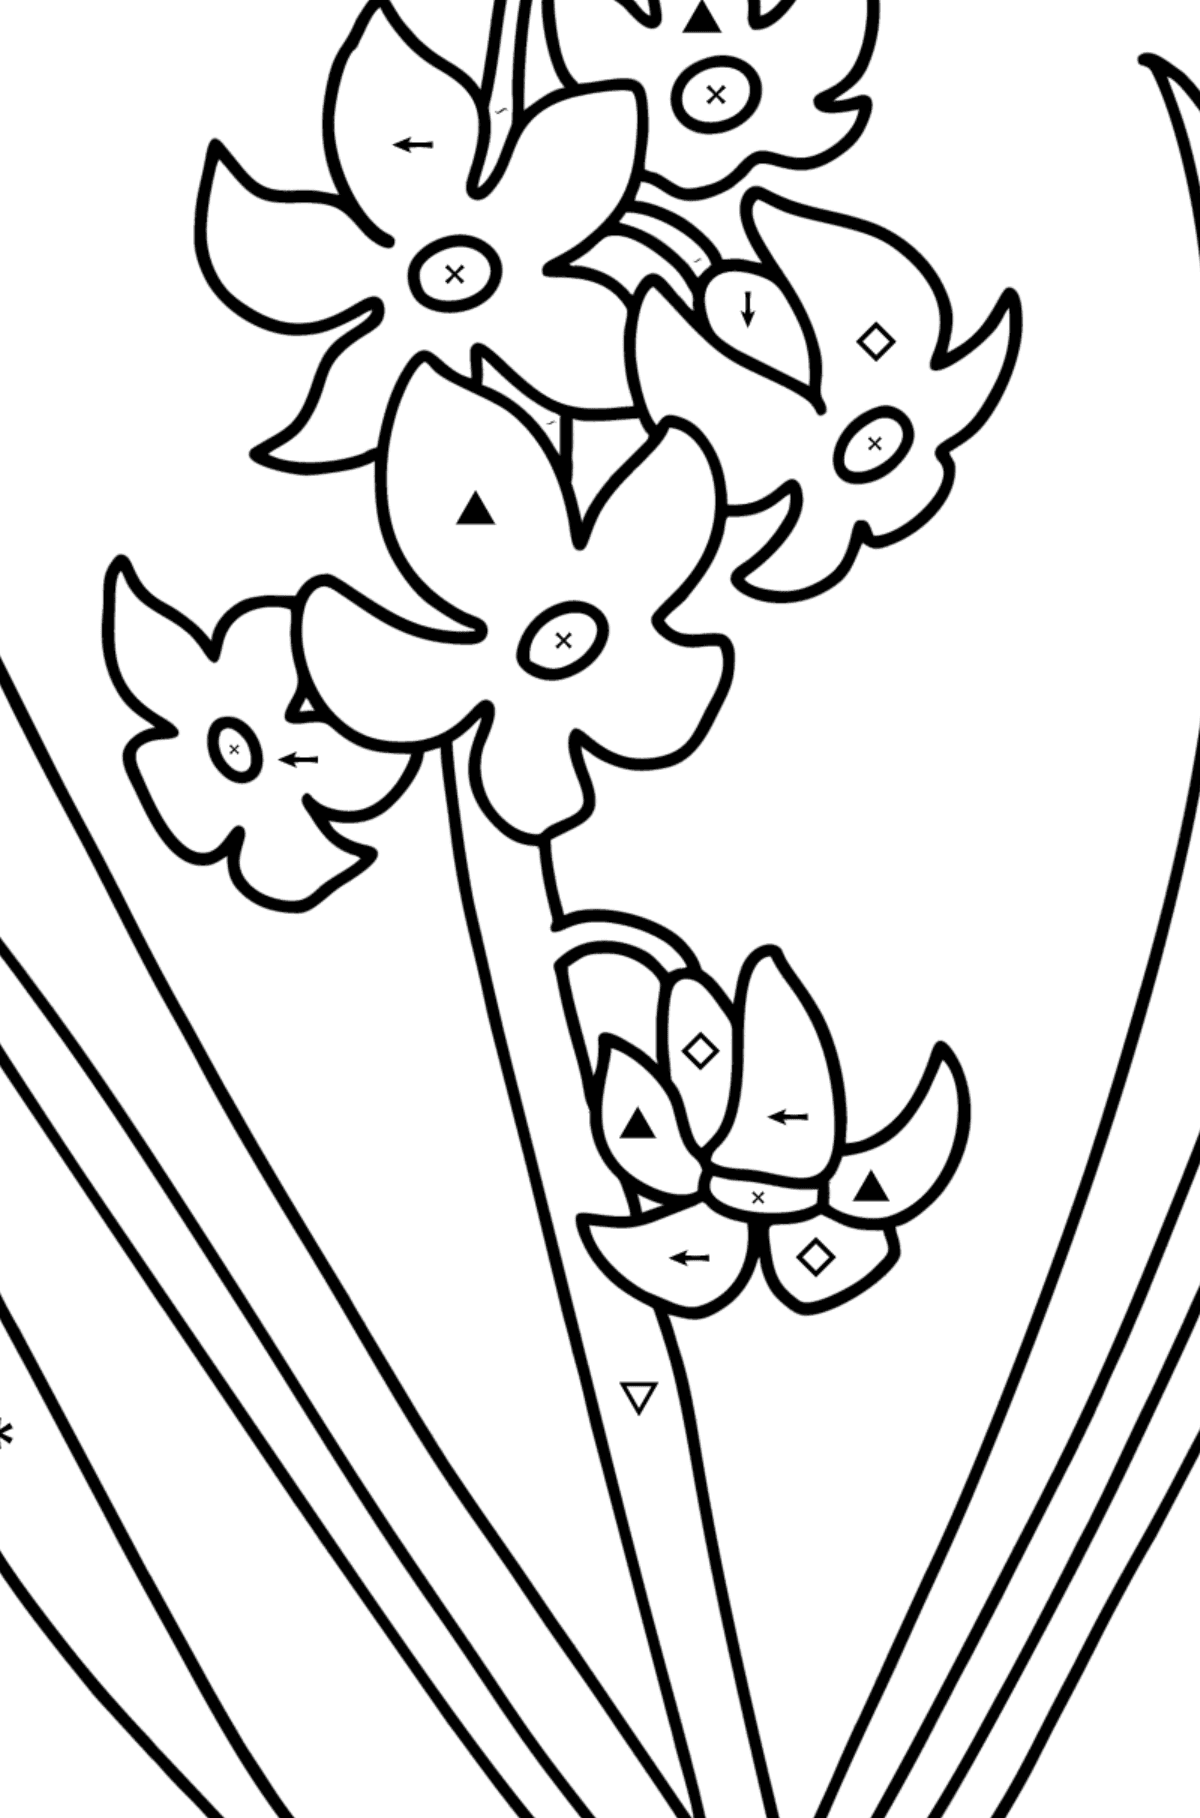 Blue Hyacinths - Flowers Coloring Pages for Adults Online